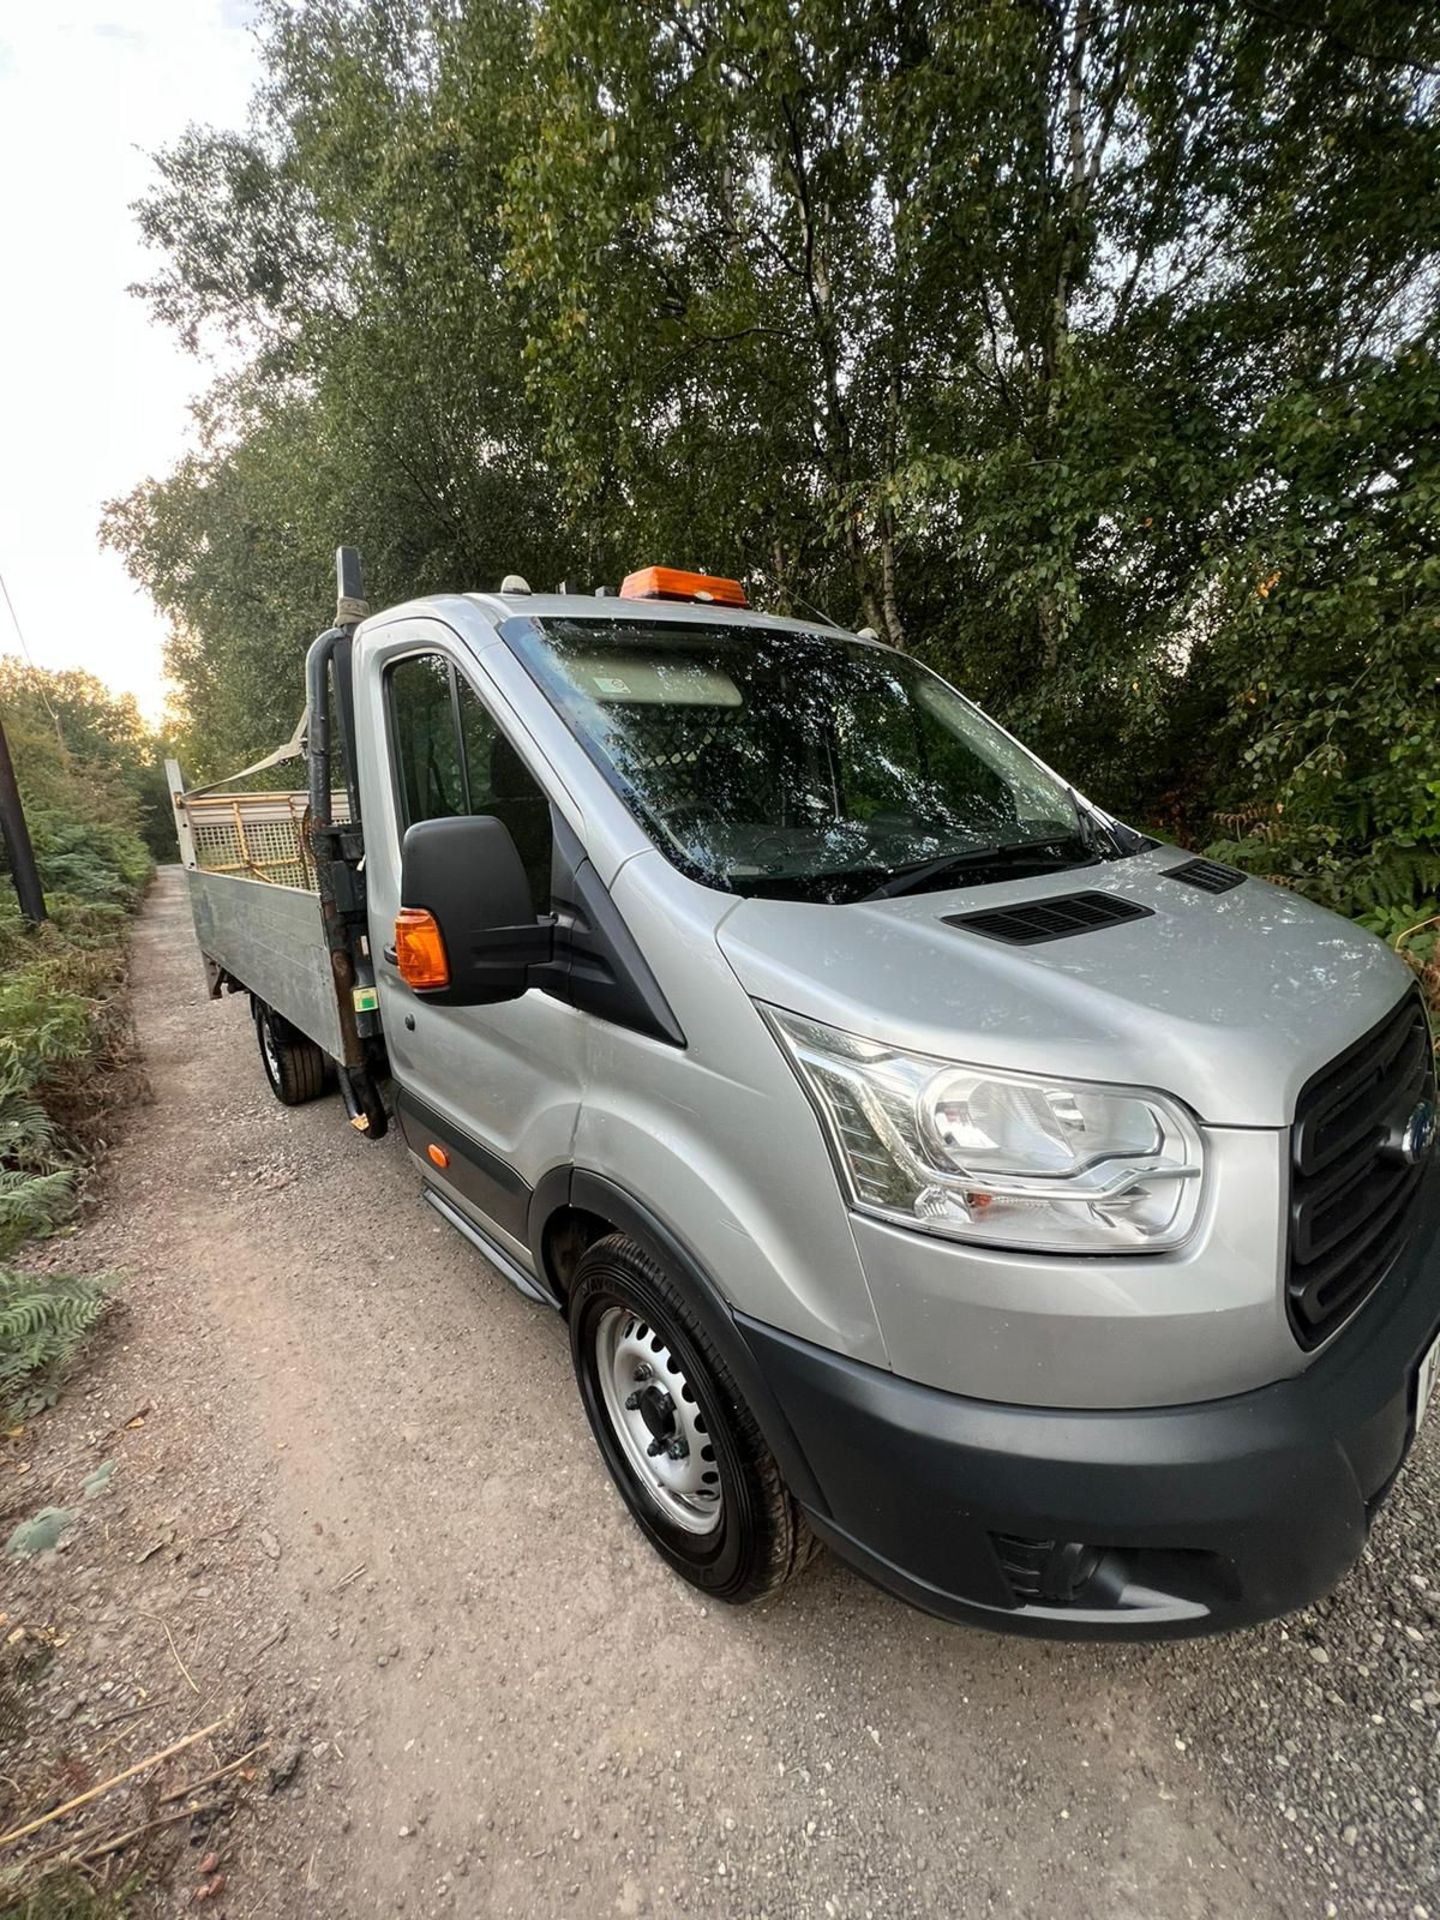 FORD TRANSIT 2016 FLATBED WITH TAIL LIFT 14 FT DROPSIDE BODY - Image 2 of 15